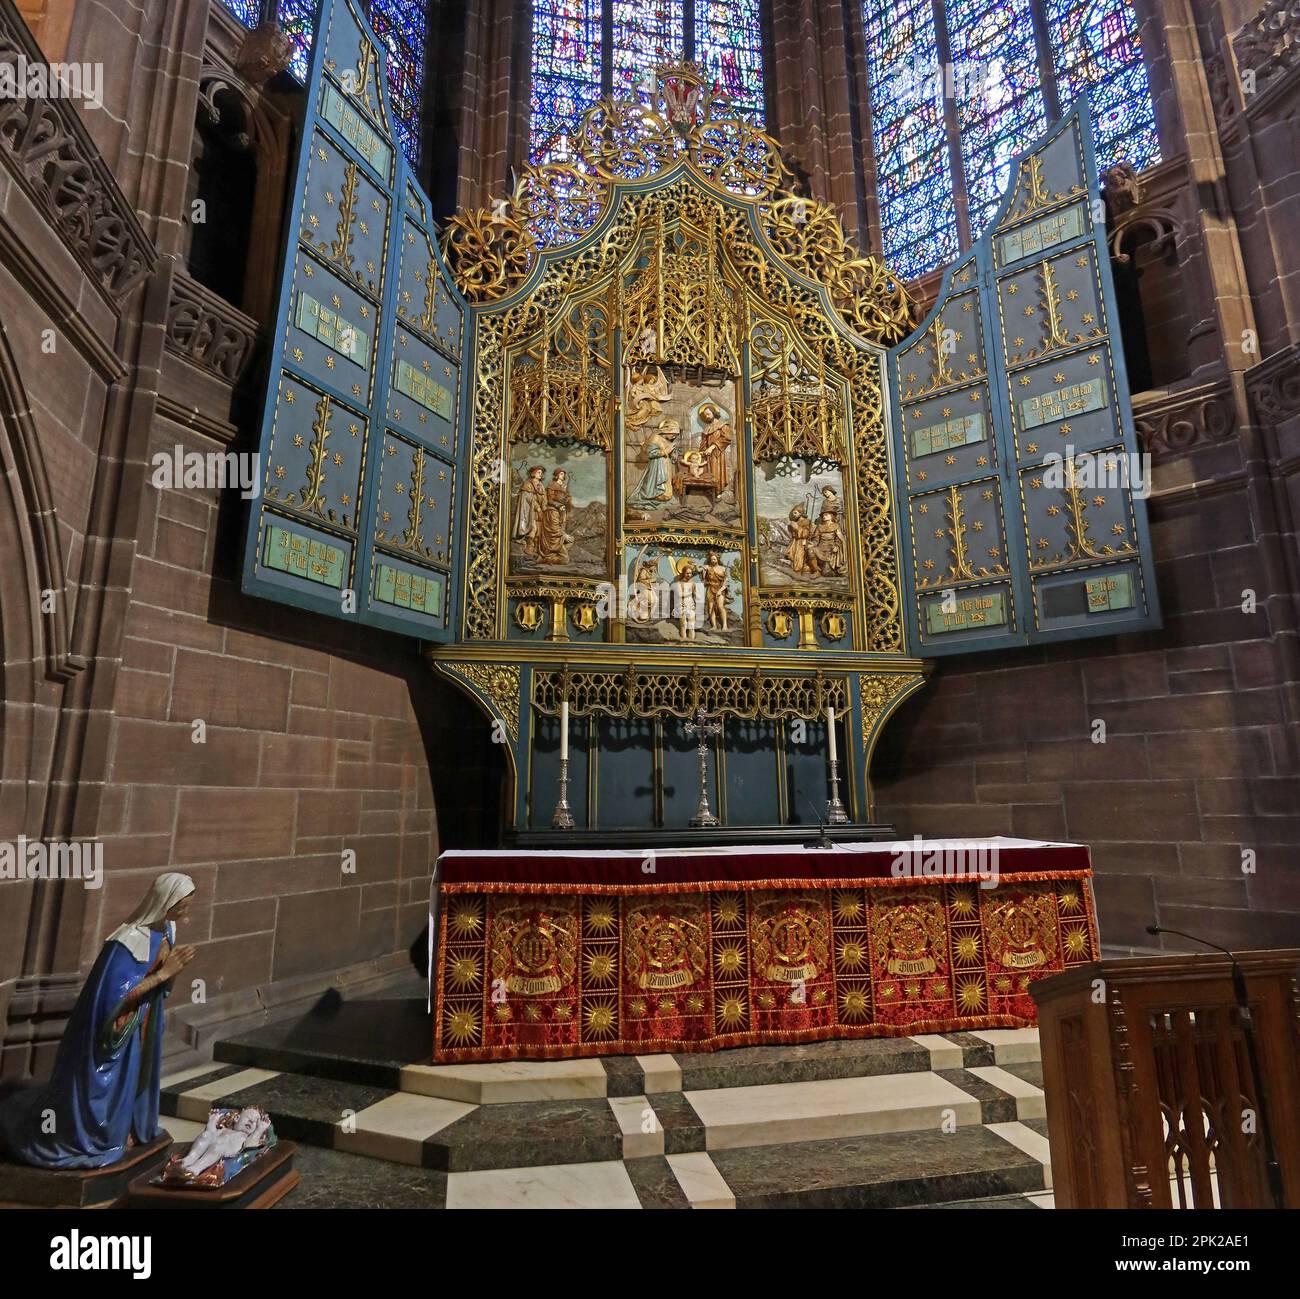 Scotts Lady Chapel, altar, Virgin Mary, Liverpool Anglican Cathedral, St James' Mount, Liverpool, Merseyside, England, UK, L1 7AZ Stock Photo